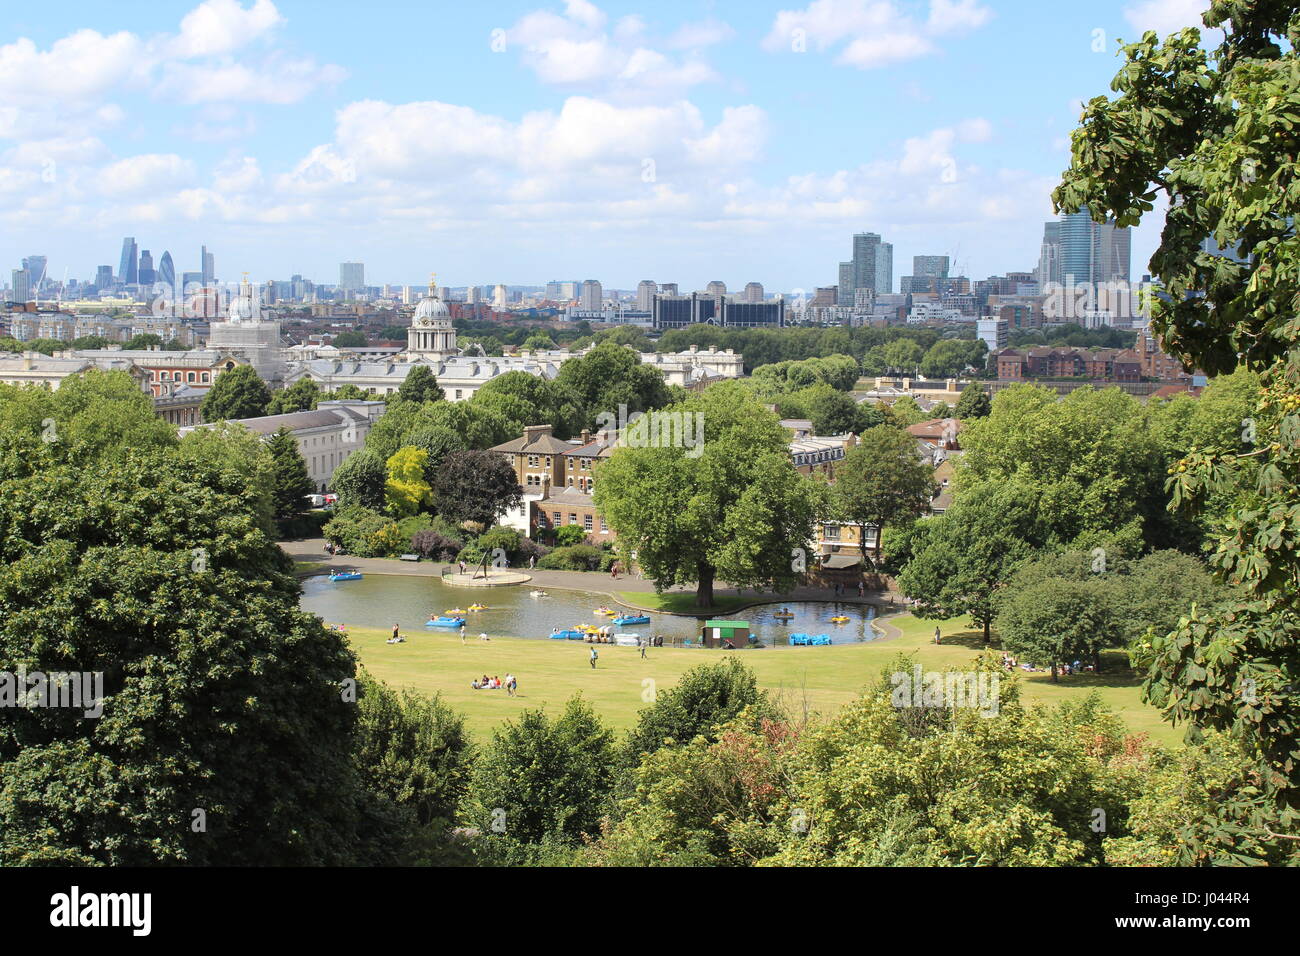 Greenwich Park Landscape - View over London City Stock Photo